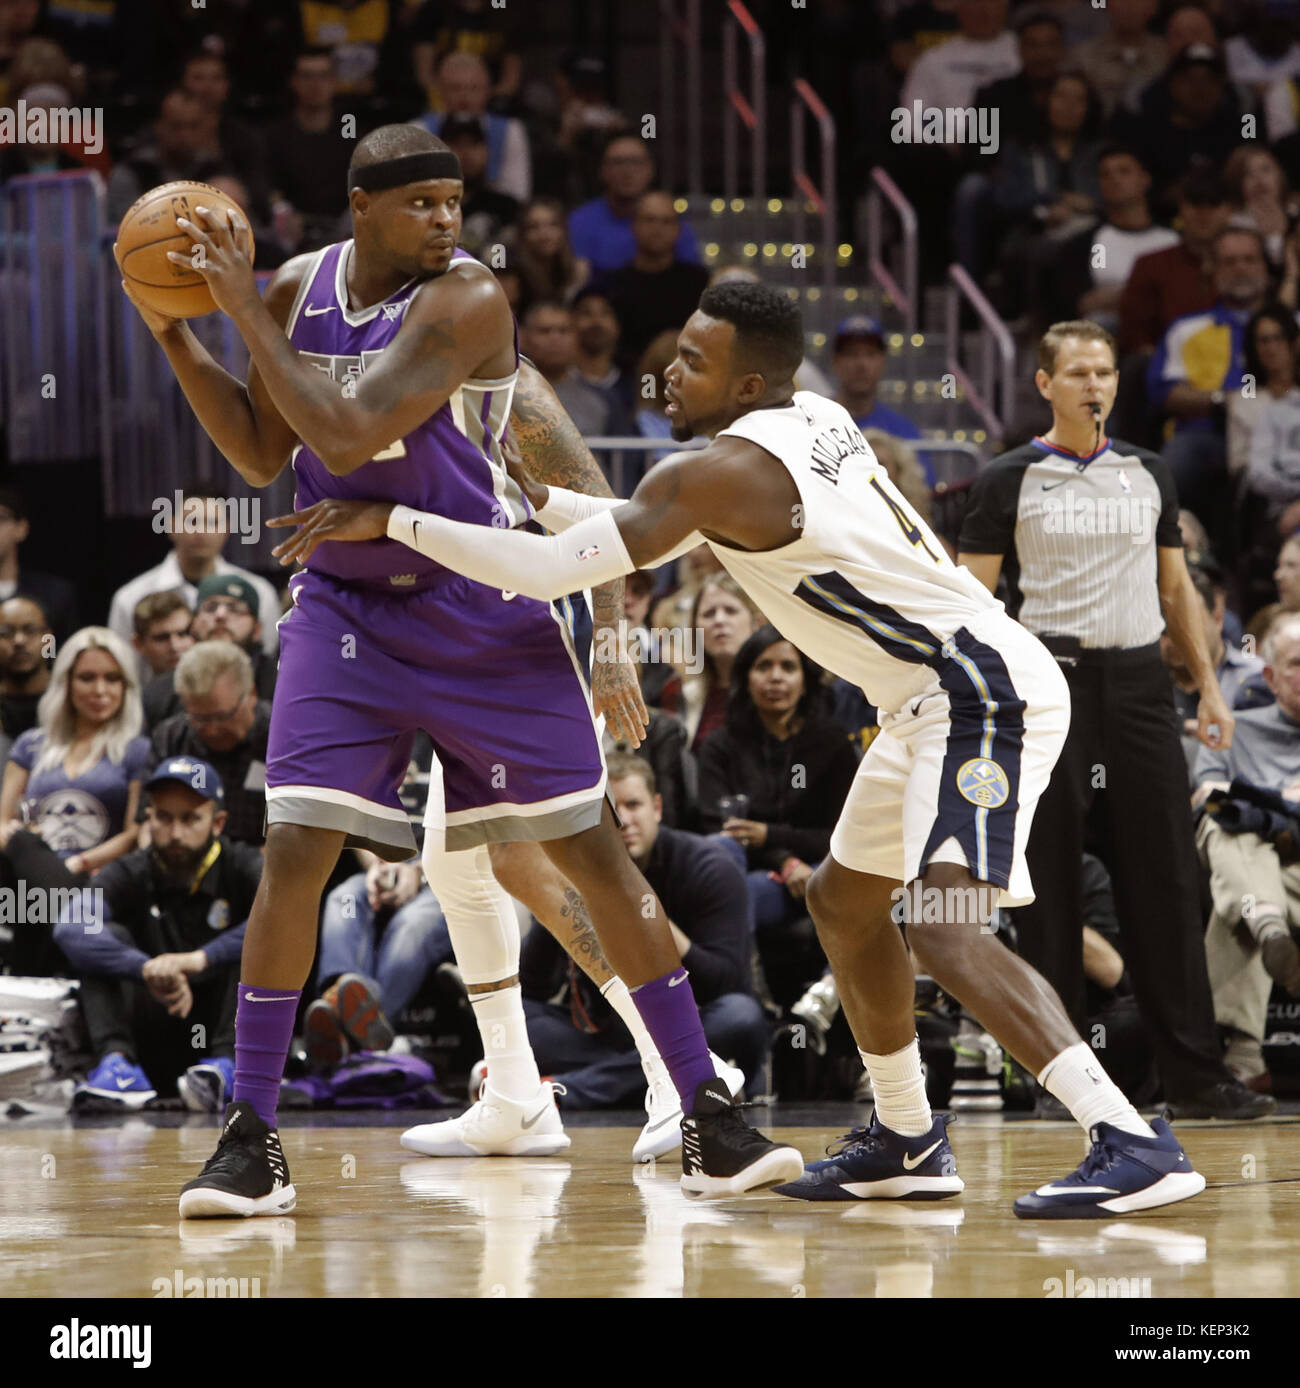 Denver, Colorado, USA. 21st Oct, 2017. Kings ZACH RANDOLPH, left, readies to make a pass with Nuggets PAUL MILSAP, right, defending him during the 1st. Half at the Pepsi Center Saturday night. The Nuggets beat the Kings 96-79. Credit: Hector Acevedo/ZUMA Wire/Alamy Live News Stock Photo